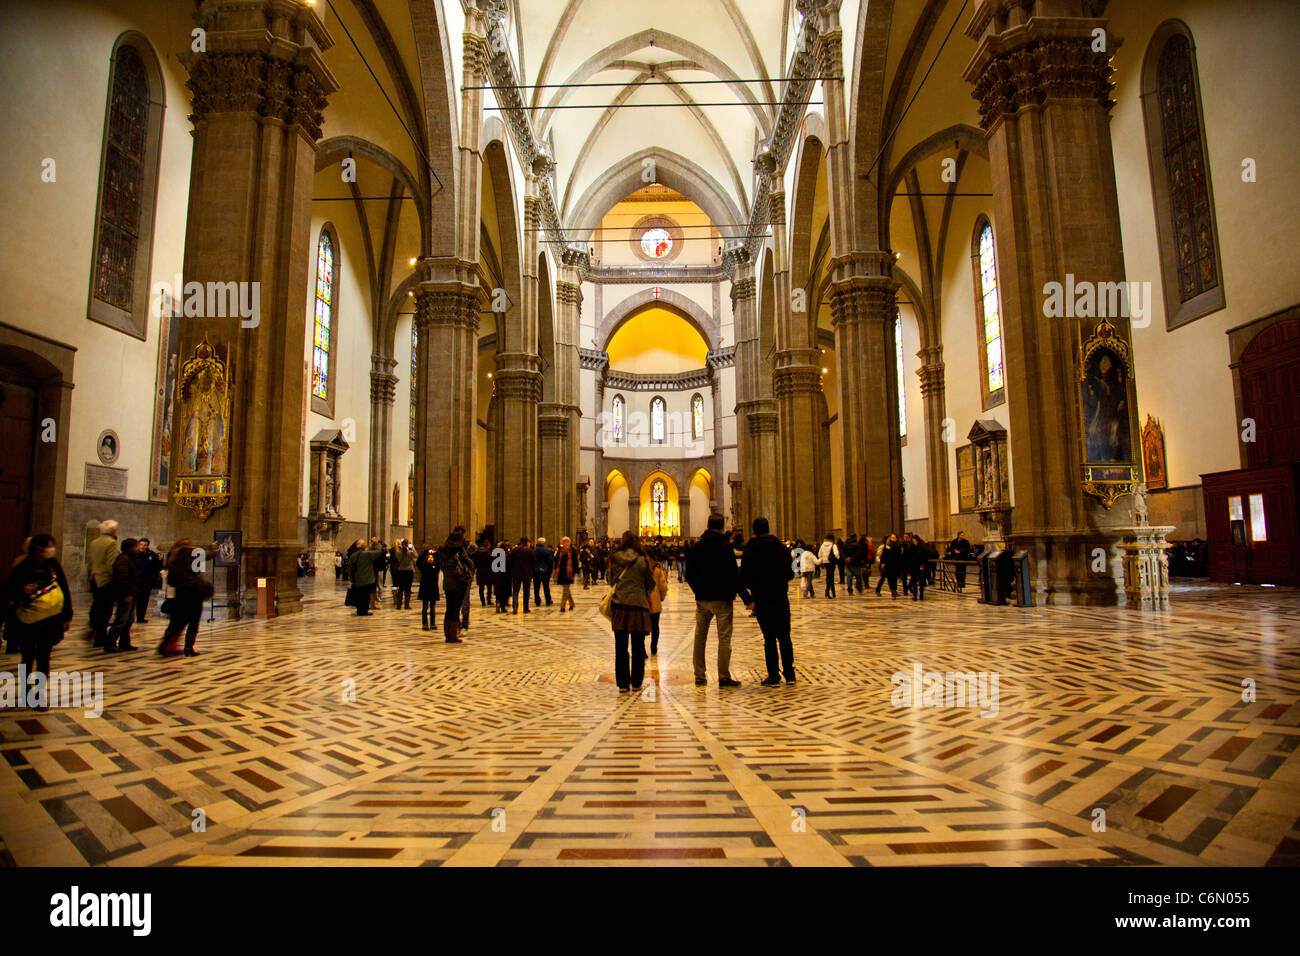 Inside the Duomo in Florence Italy. Stock Photo